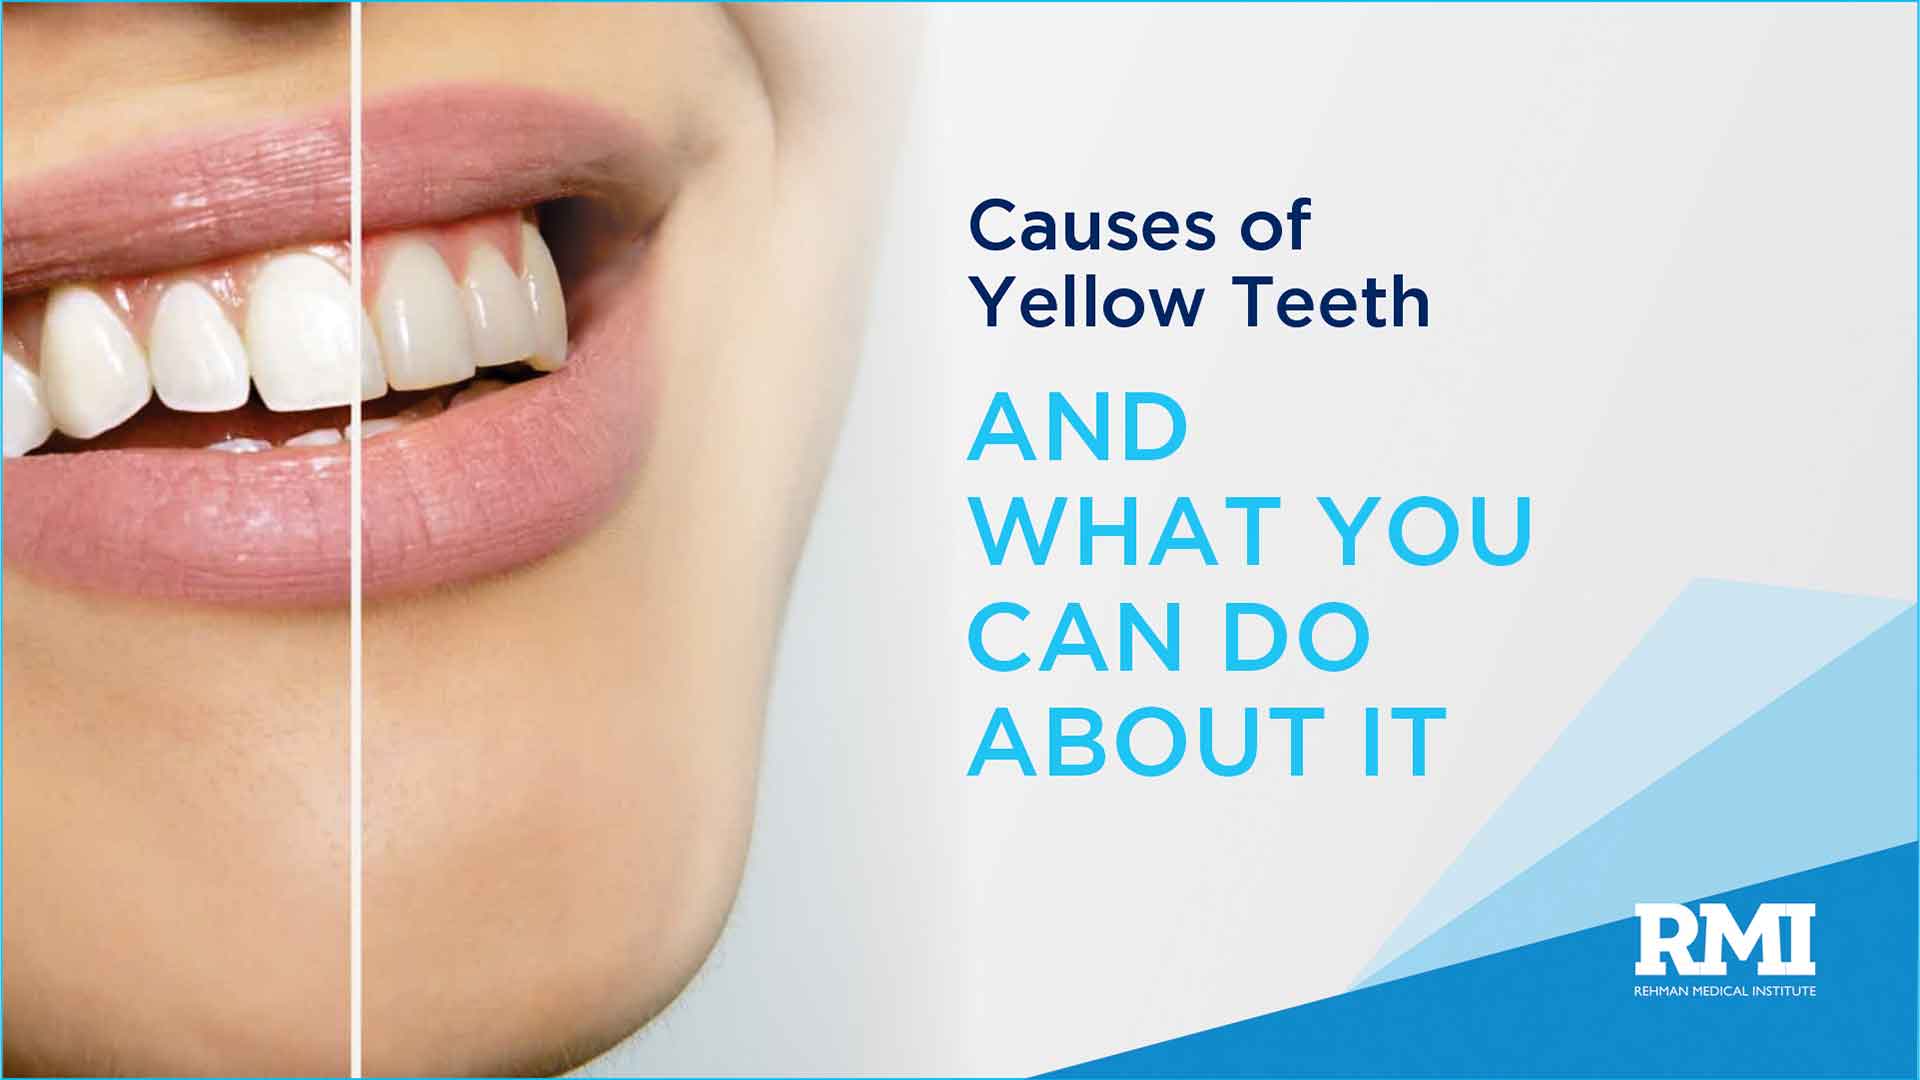 Causes of Yellow Teeth and What You Can Do About It